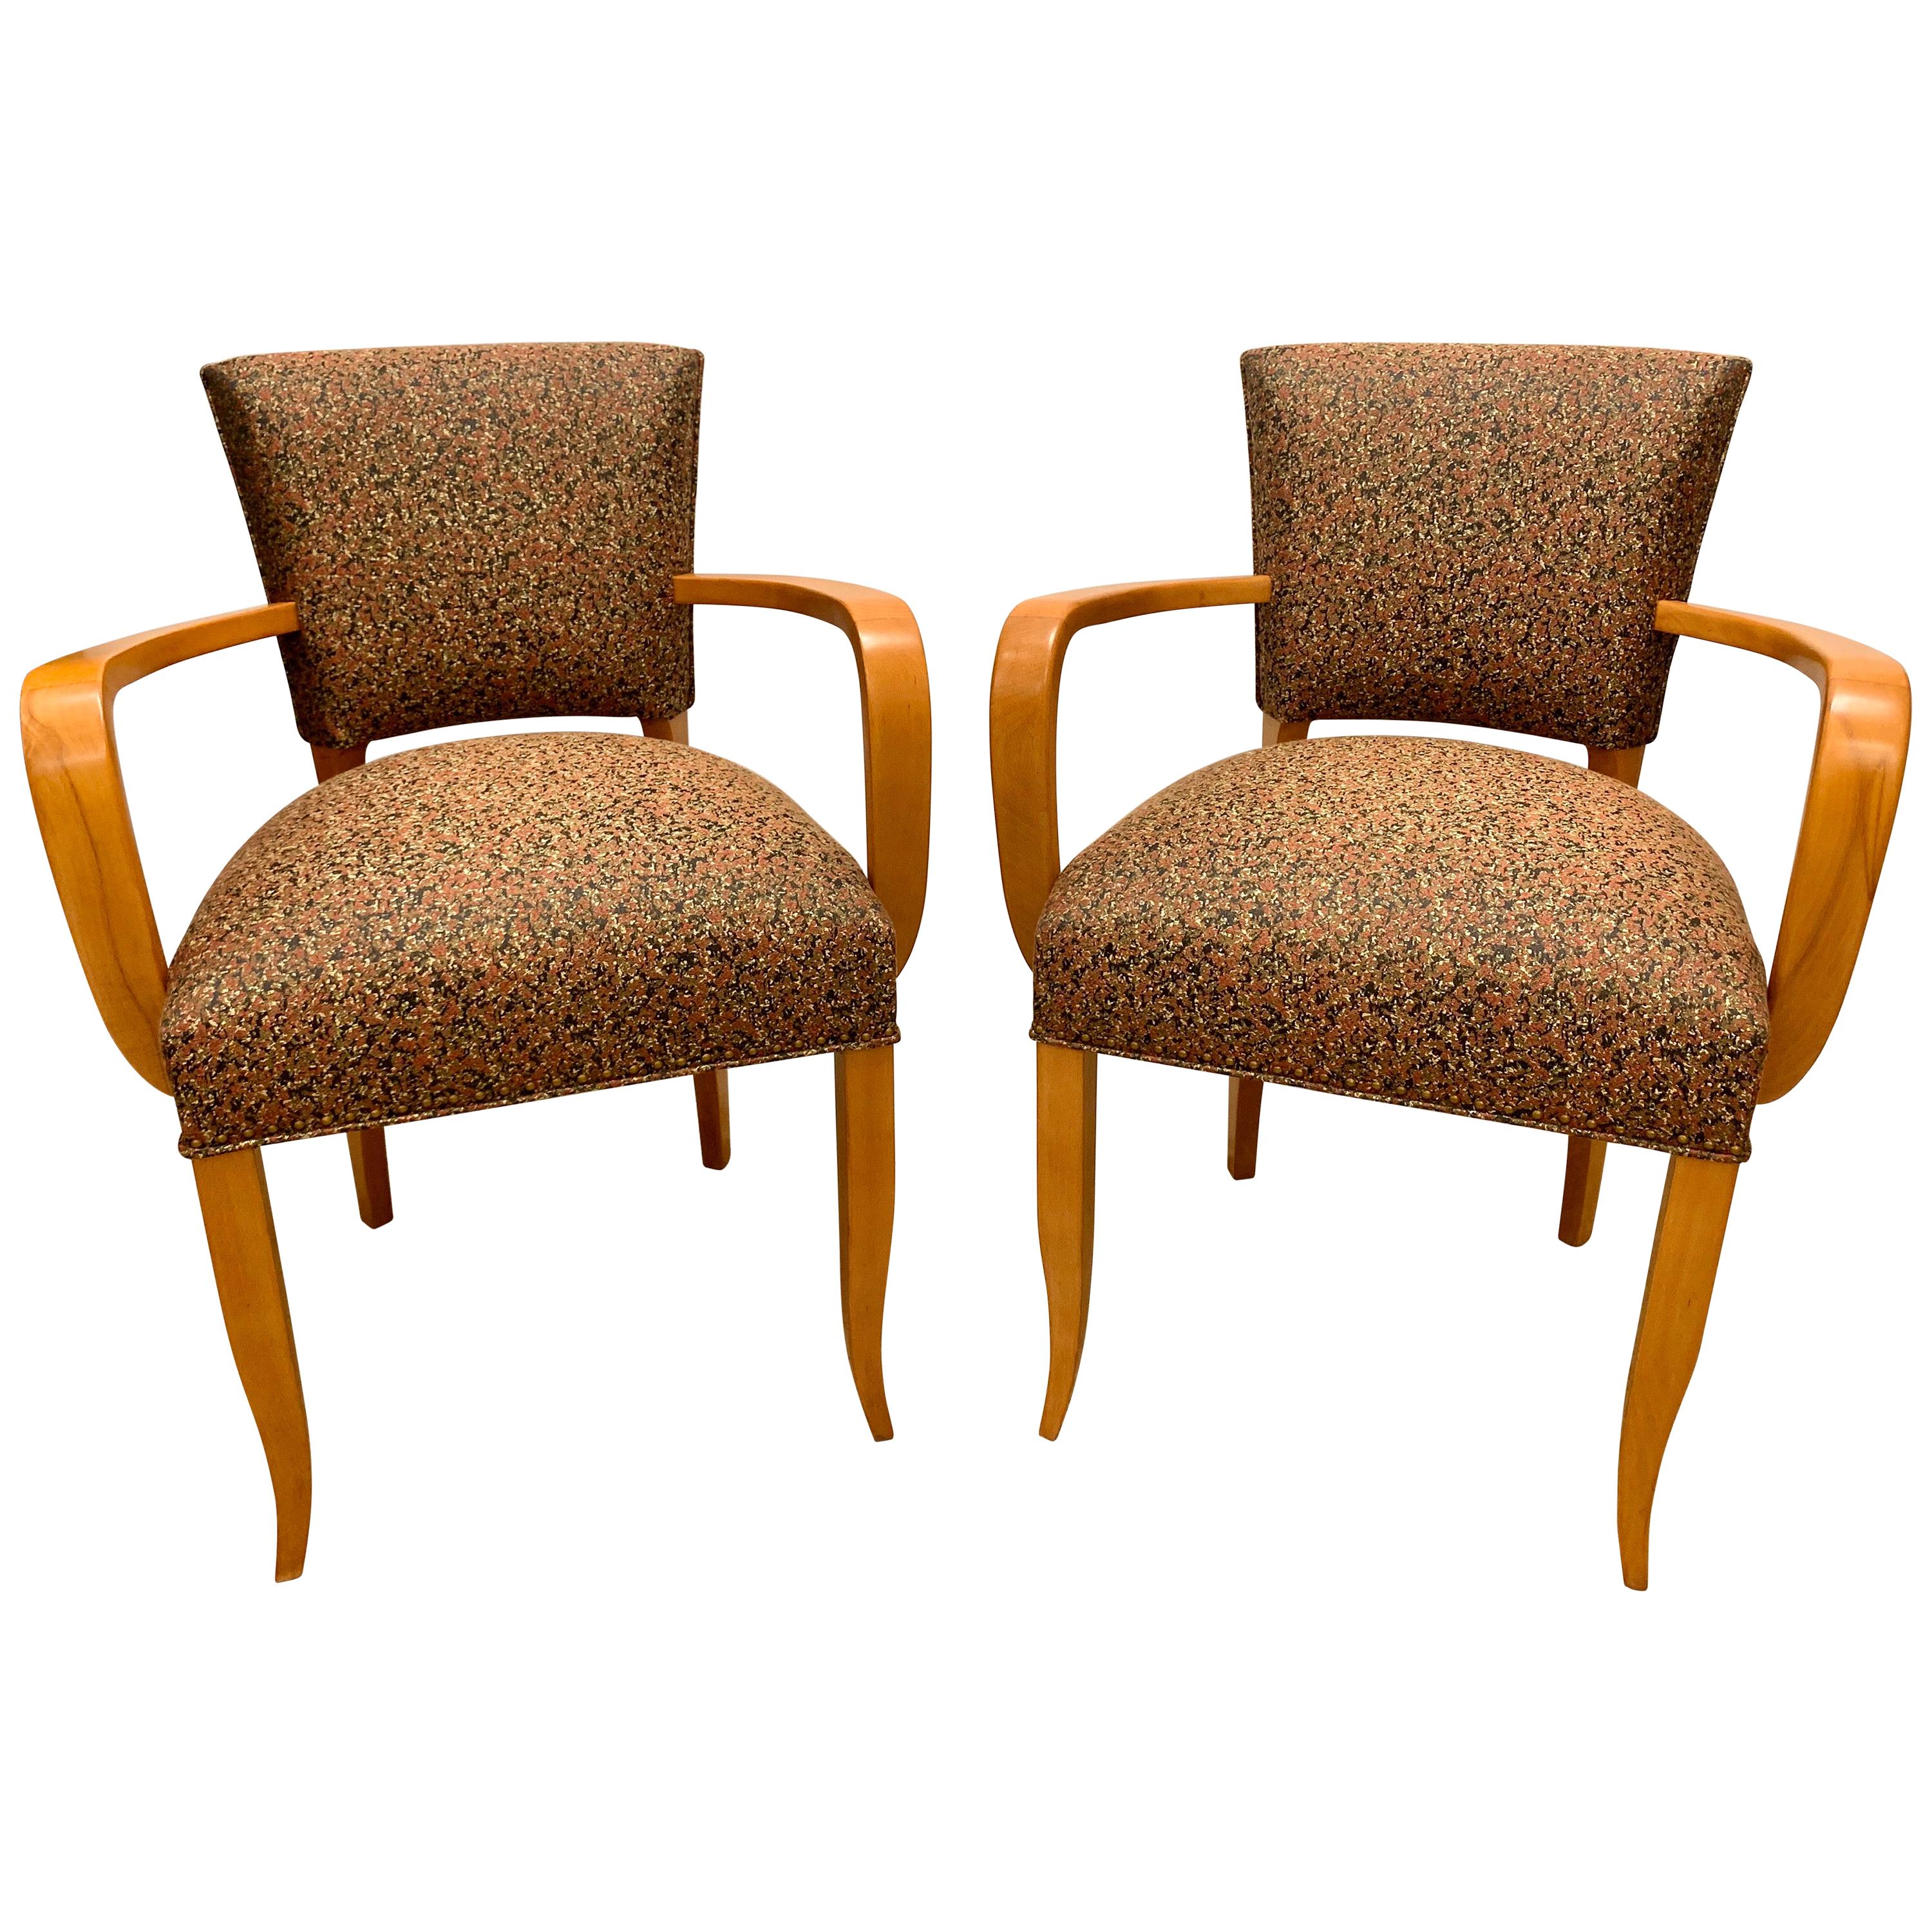 French Deco Bridge/ Side-Chairs with Arms, Pair